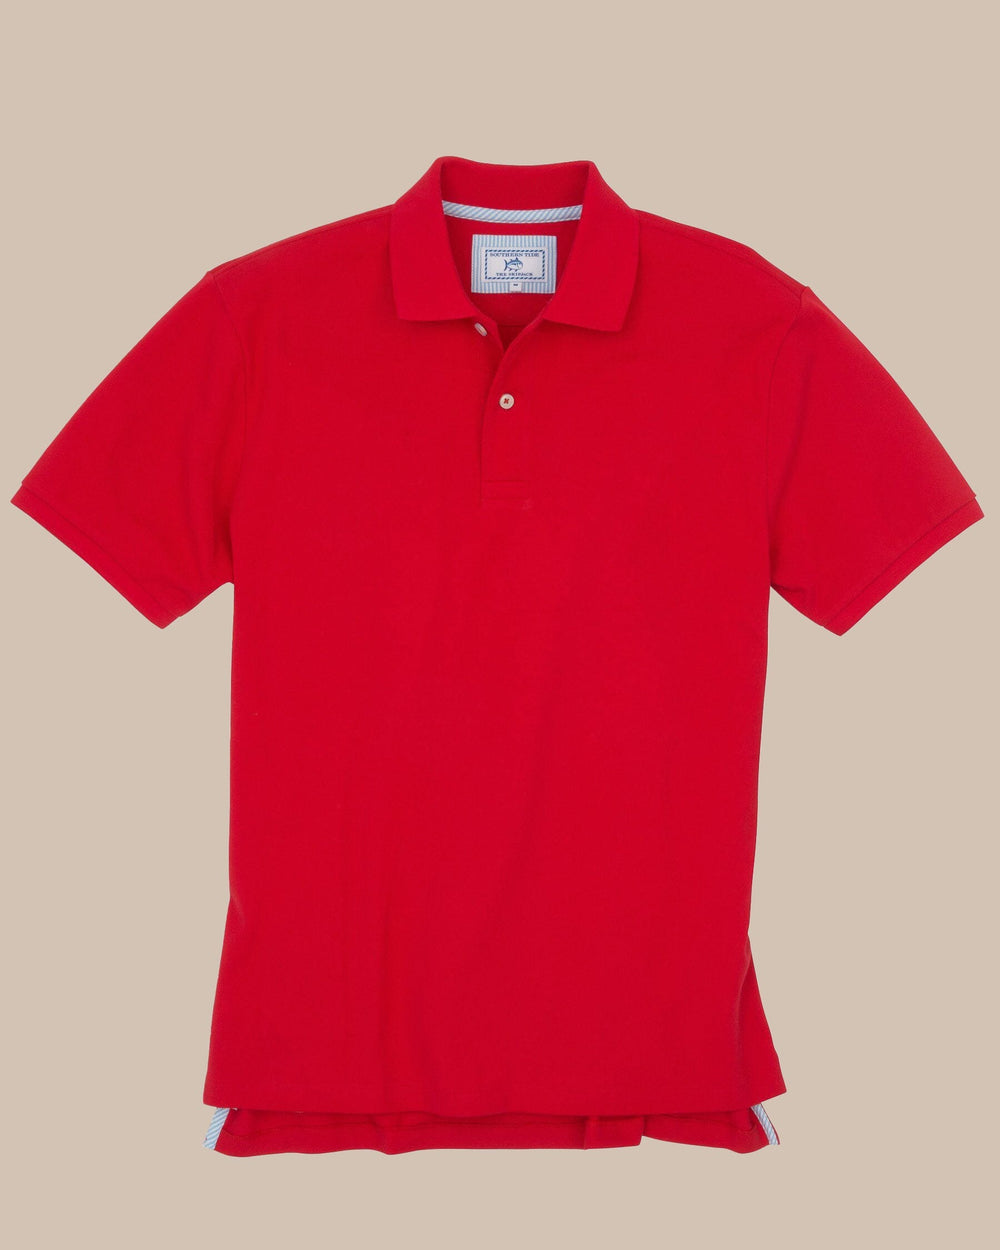 The front view of the Men's Red Skipjack Gameday Colors Polo Shirt by Southern Tide - Varsity Red